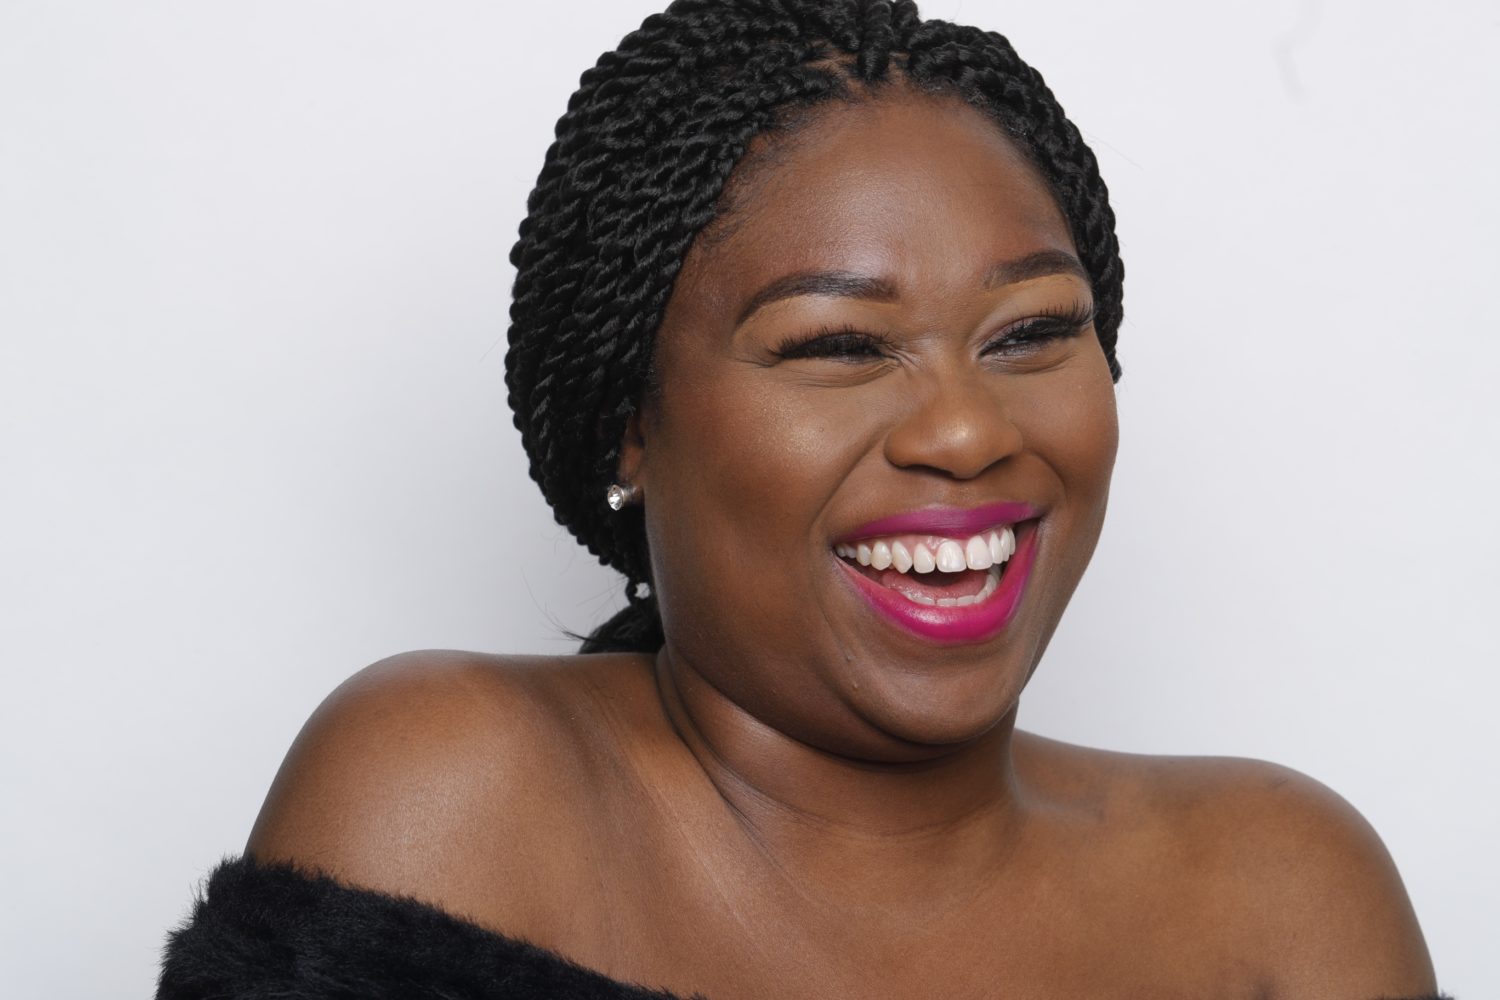 This Nigerian Cosmetics Brand Just Unveiled A New Lipstick Range We’re In Love With!